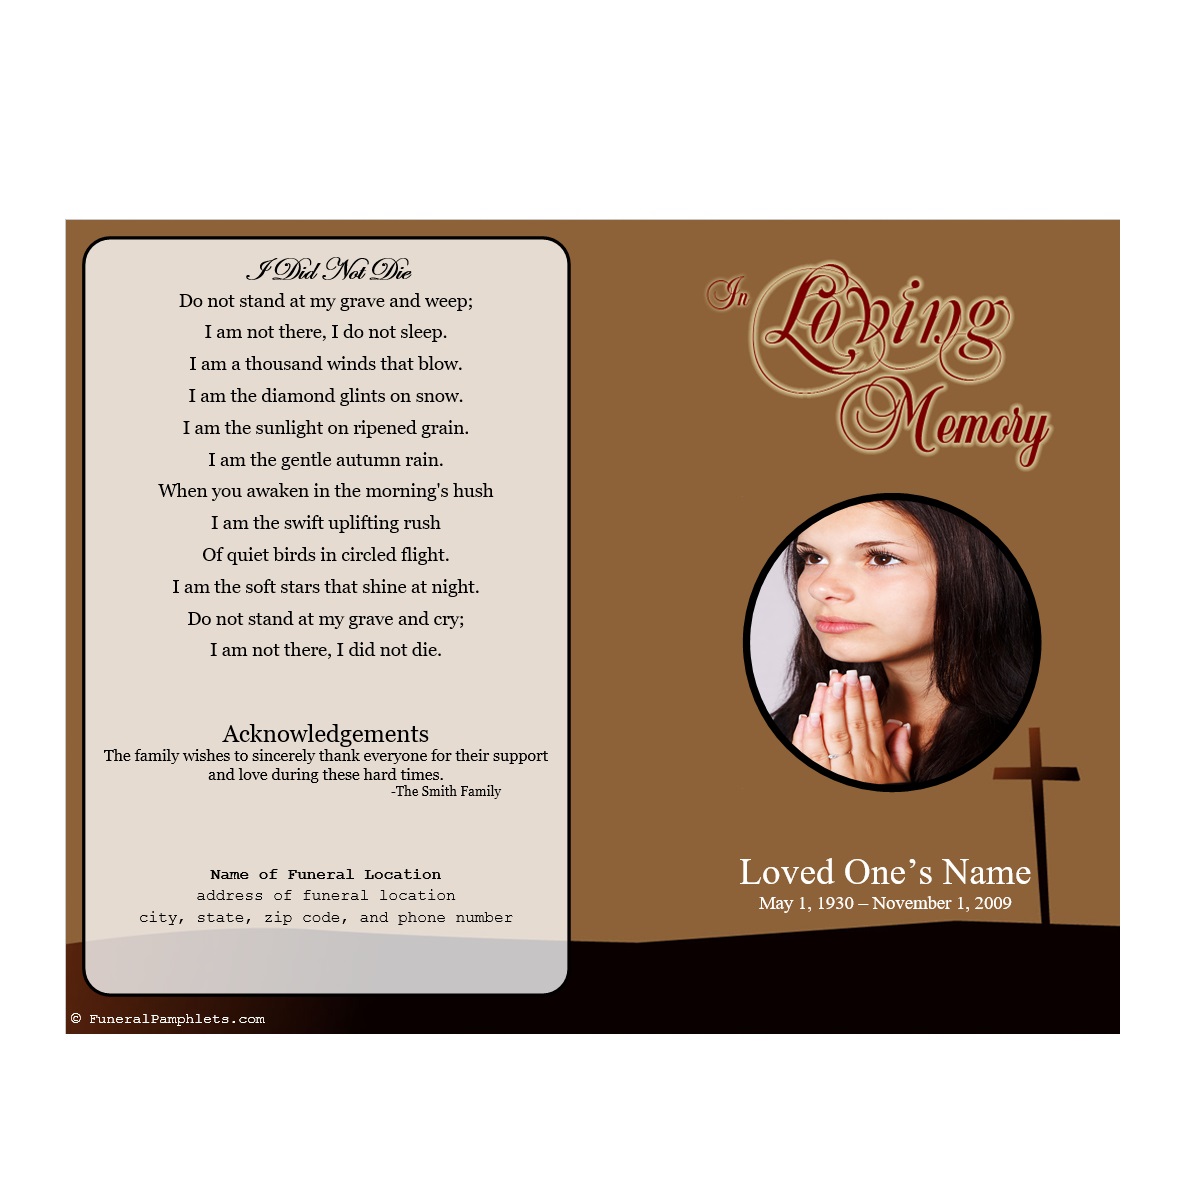 Catholic Funeral Program Template from www.funeralpamphlets.com